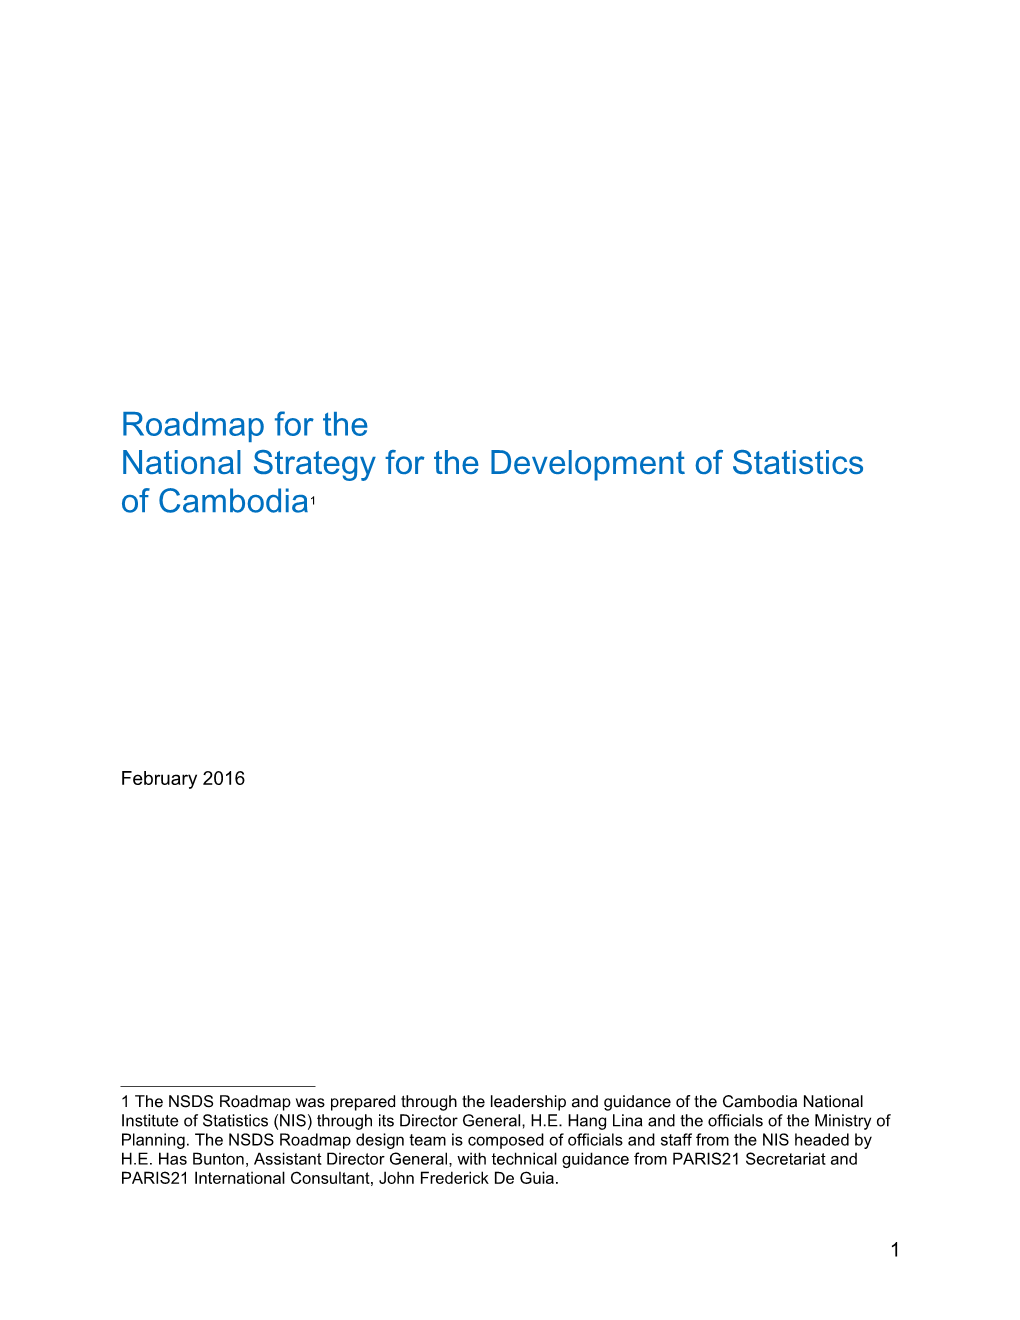 National Strategy for the Development of Statistics of Cambodia 1